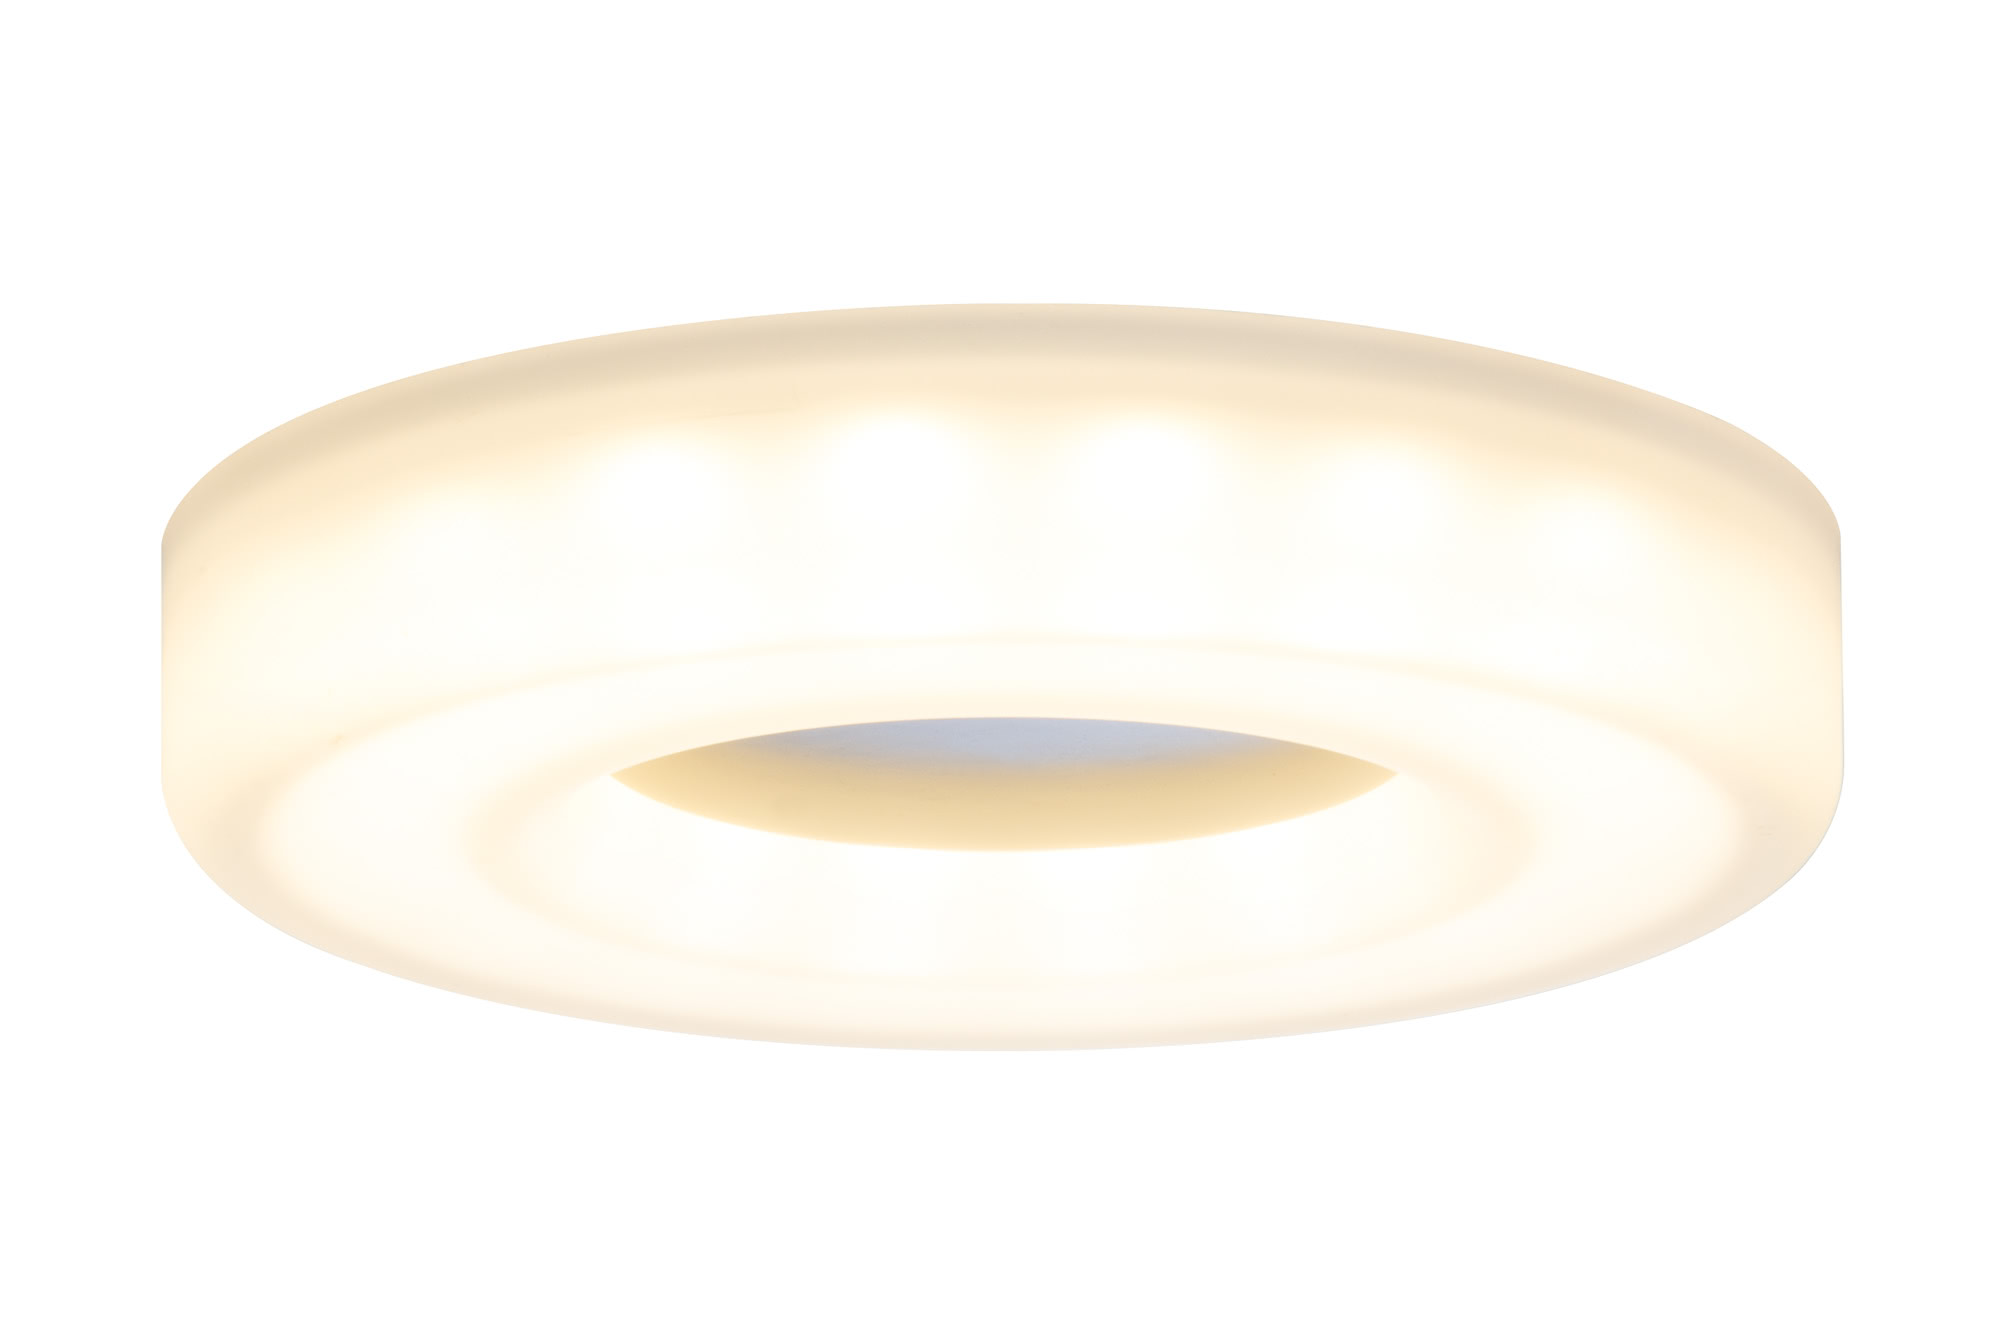 92704 Prem. EBL Set Bagel rund LED 3x6W Sat/Al Elegant material вЂ“ high-quality finish. The LED recessed luminaires in the Premium Line offer efficient but homelike warm white LED light and meet the most stringent standards for material quality and design. The recessed lamp means that the light it emits is free of glare despite its excellent light output. 927.04 Paulmann